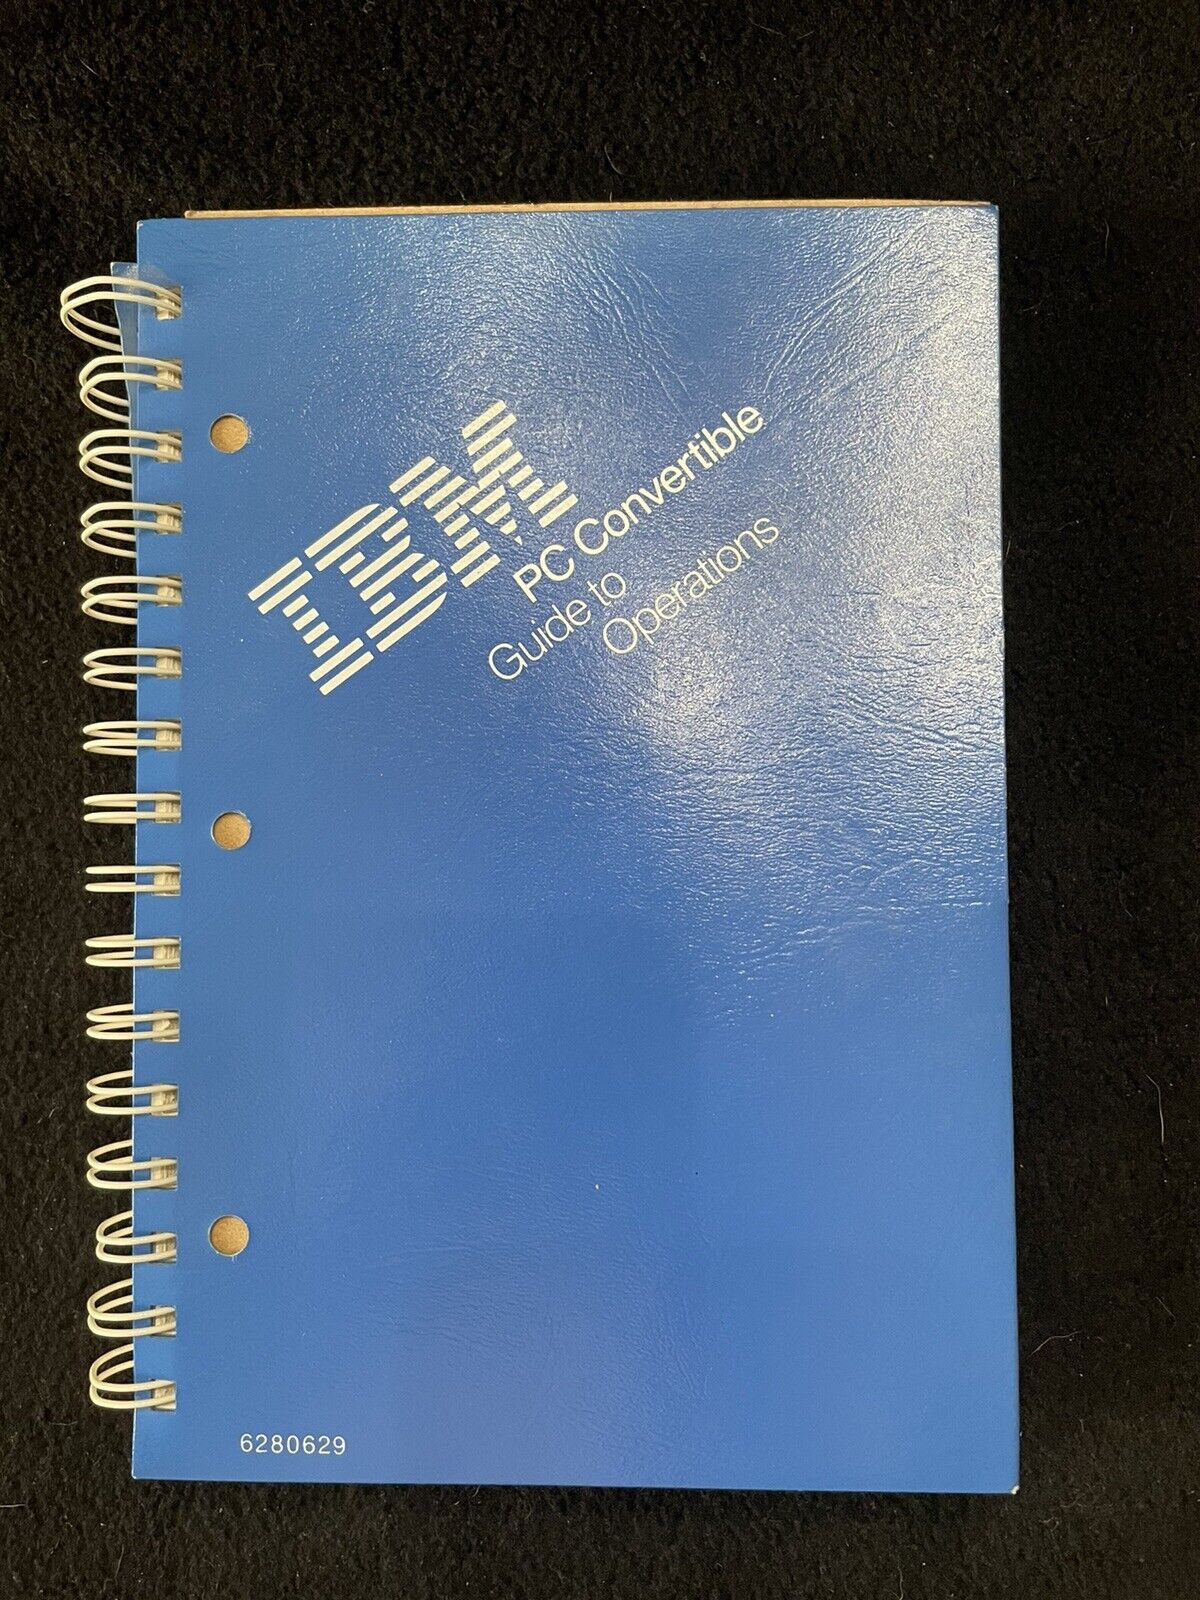 Vintage IBM PC Convertible Guide To Operations, 6280629, 1986 , 1st Edition